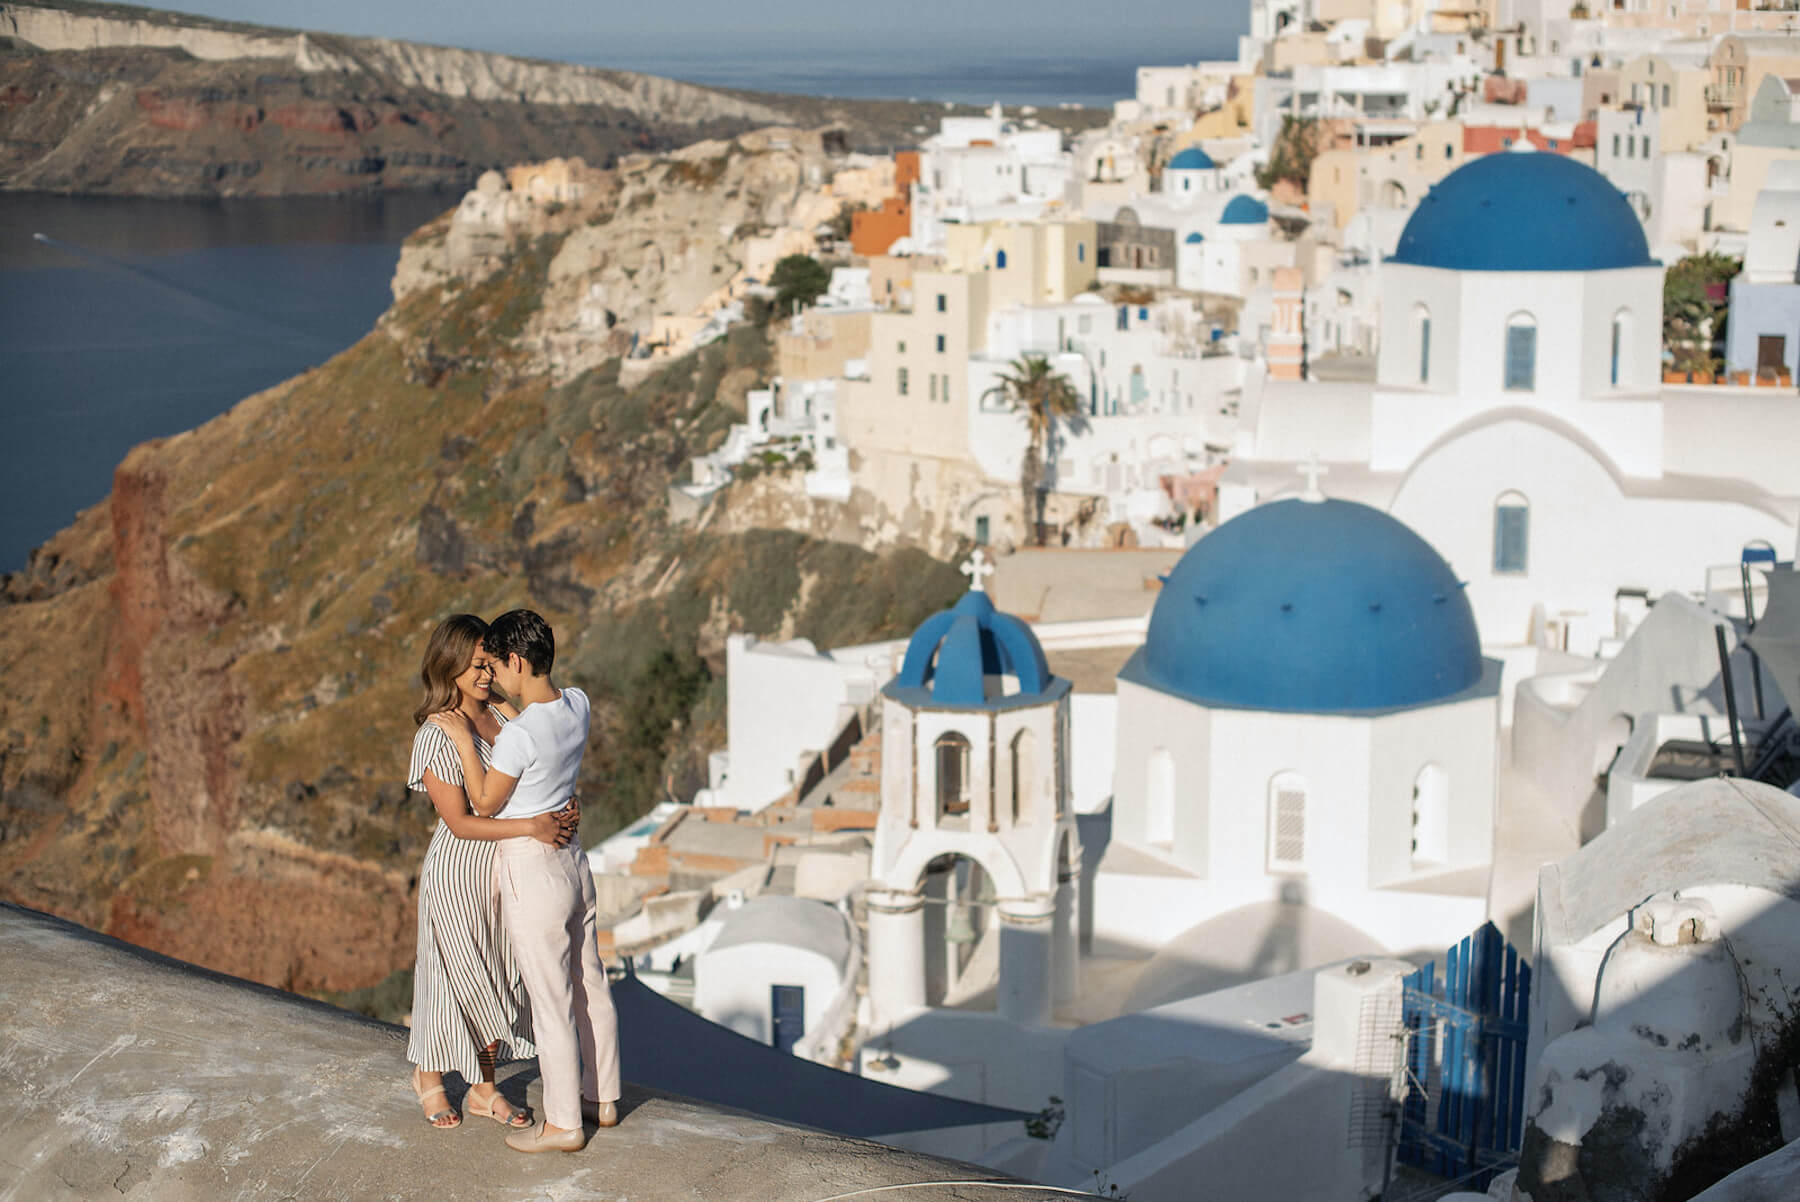 Couple enjoying the views surrounded by beautiful blue and white houses in Santorini